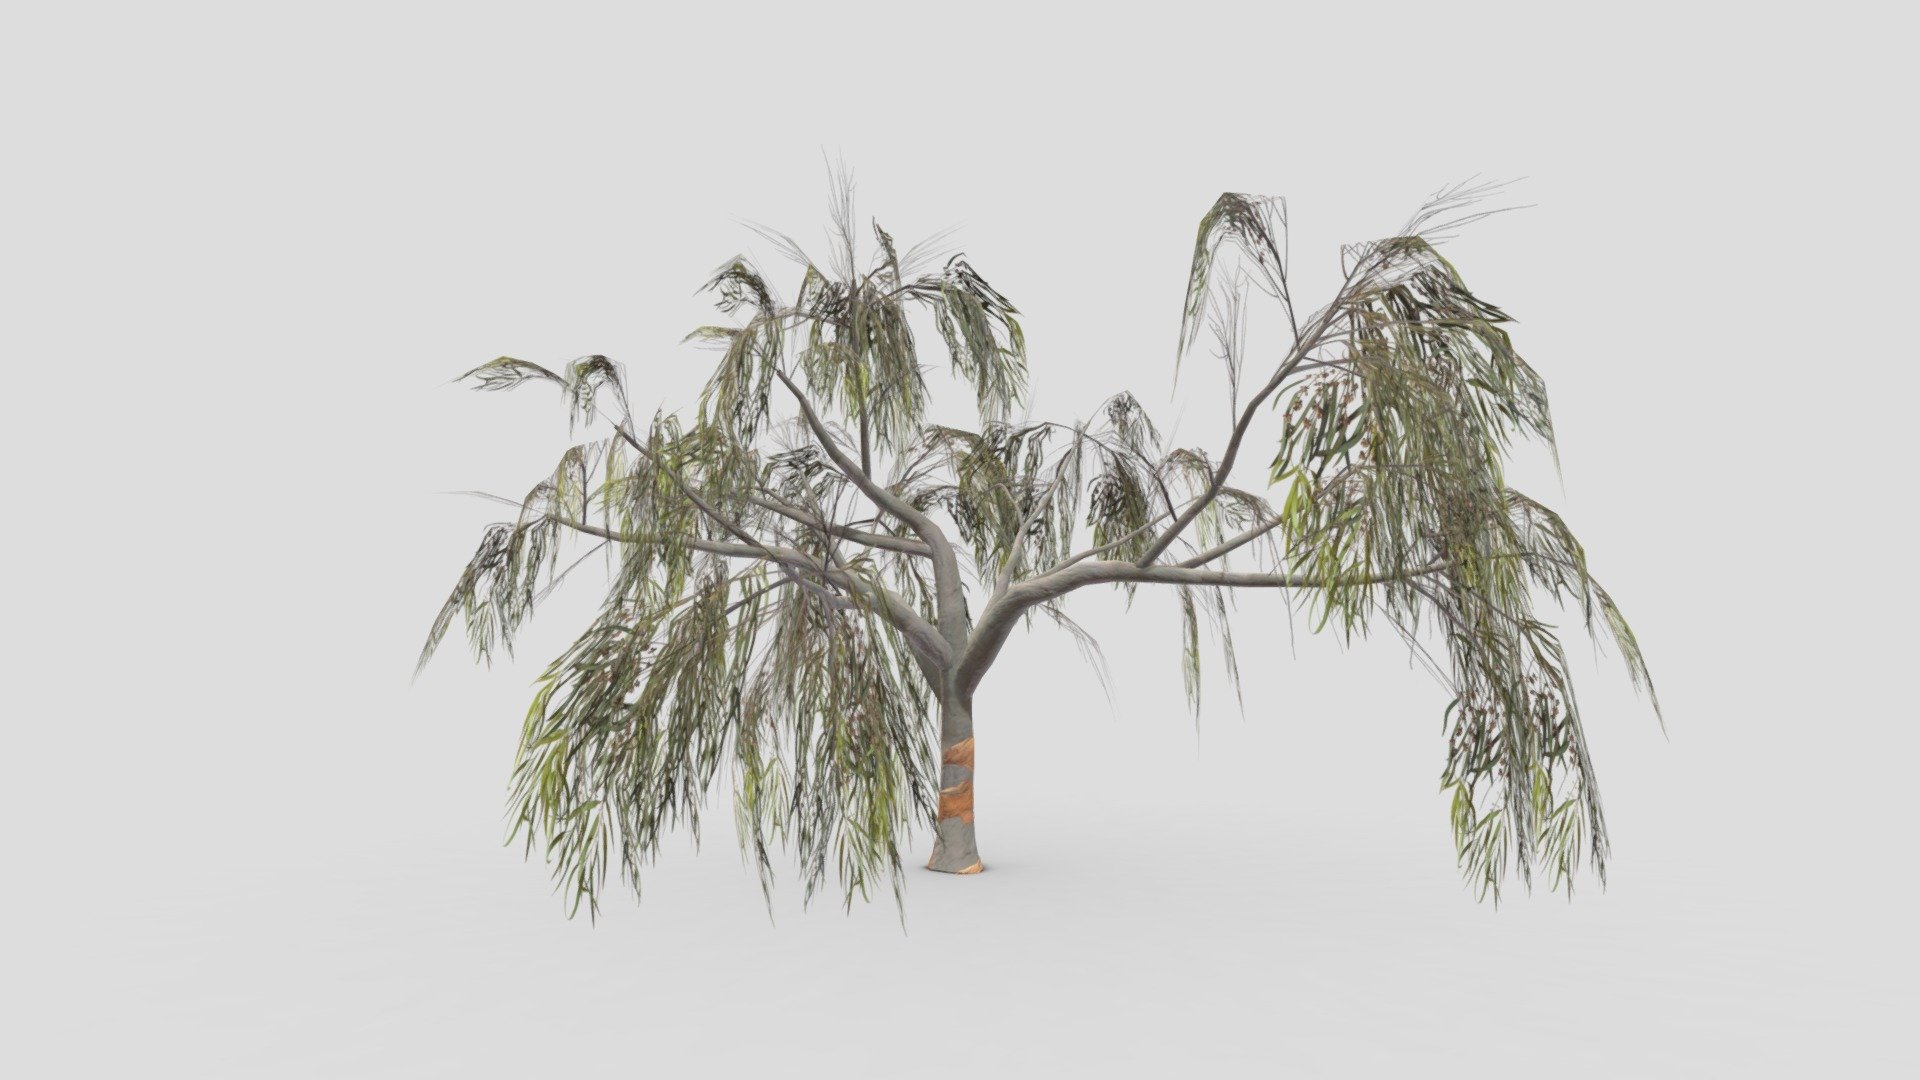 This is a lowpoly model of Eucalyptus Aus Tree. I made this file for game developers and I try to provide lowpoly model 3d model